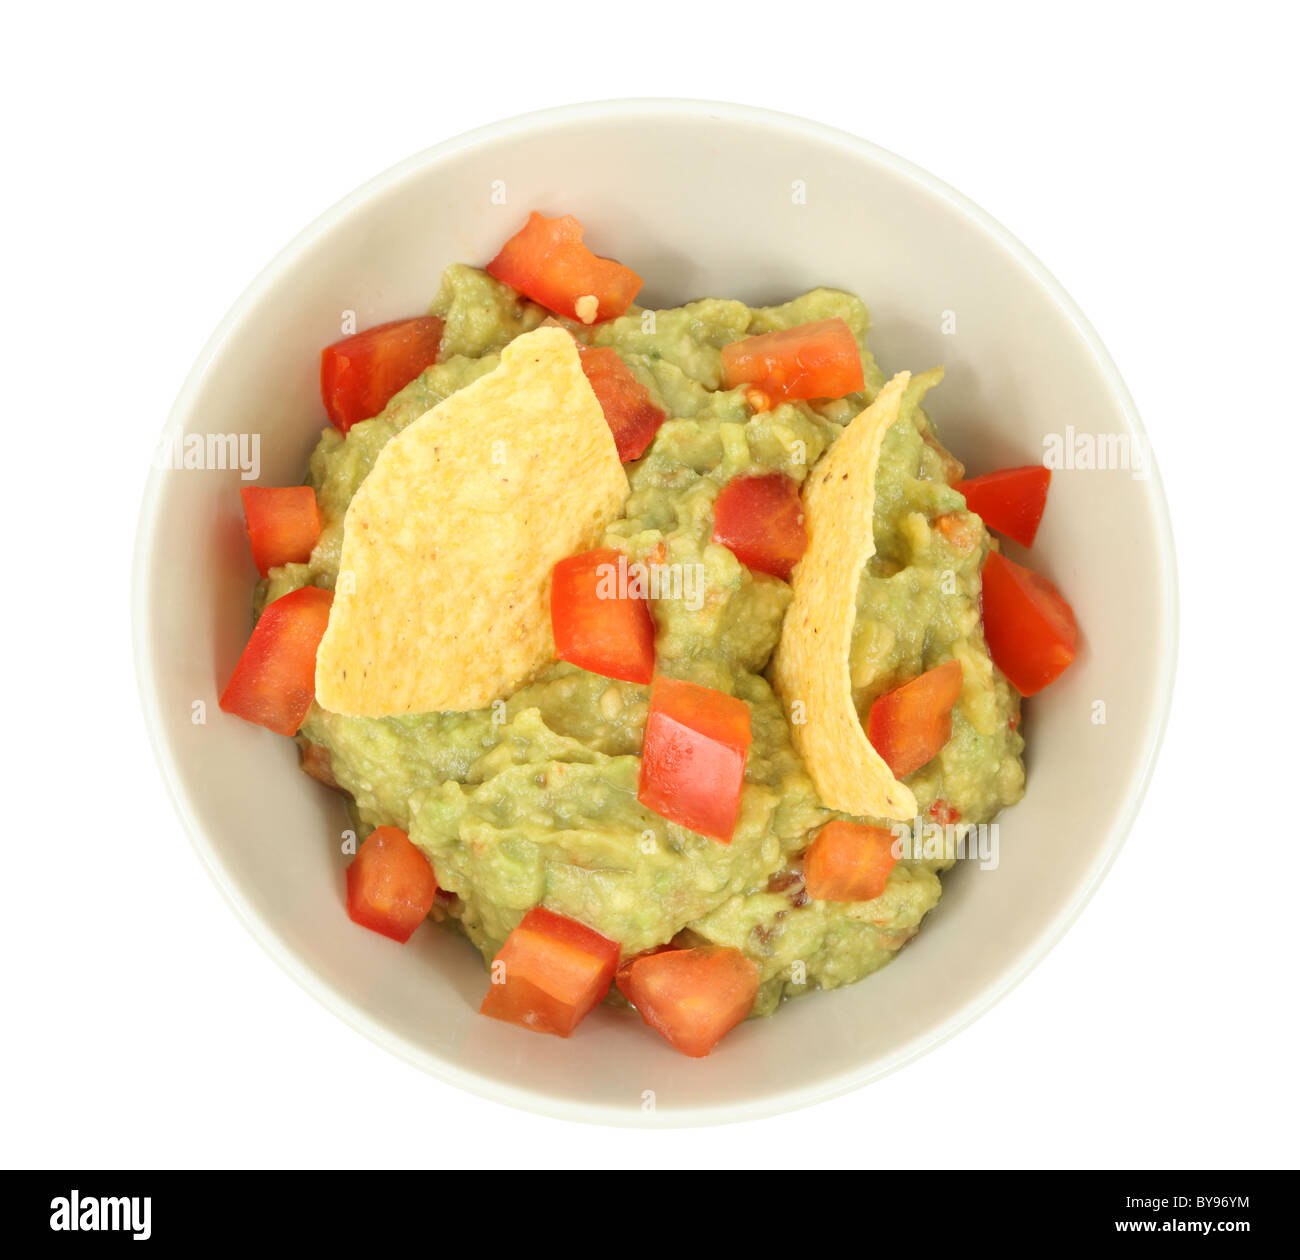 Guacamole dip with tortilla chips Stock Photo